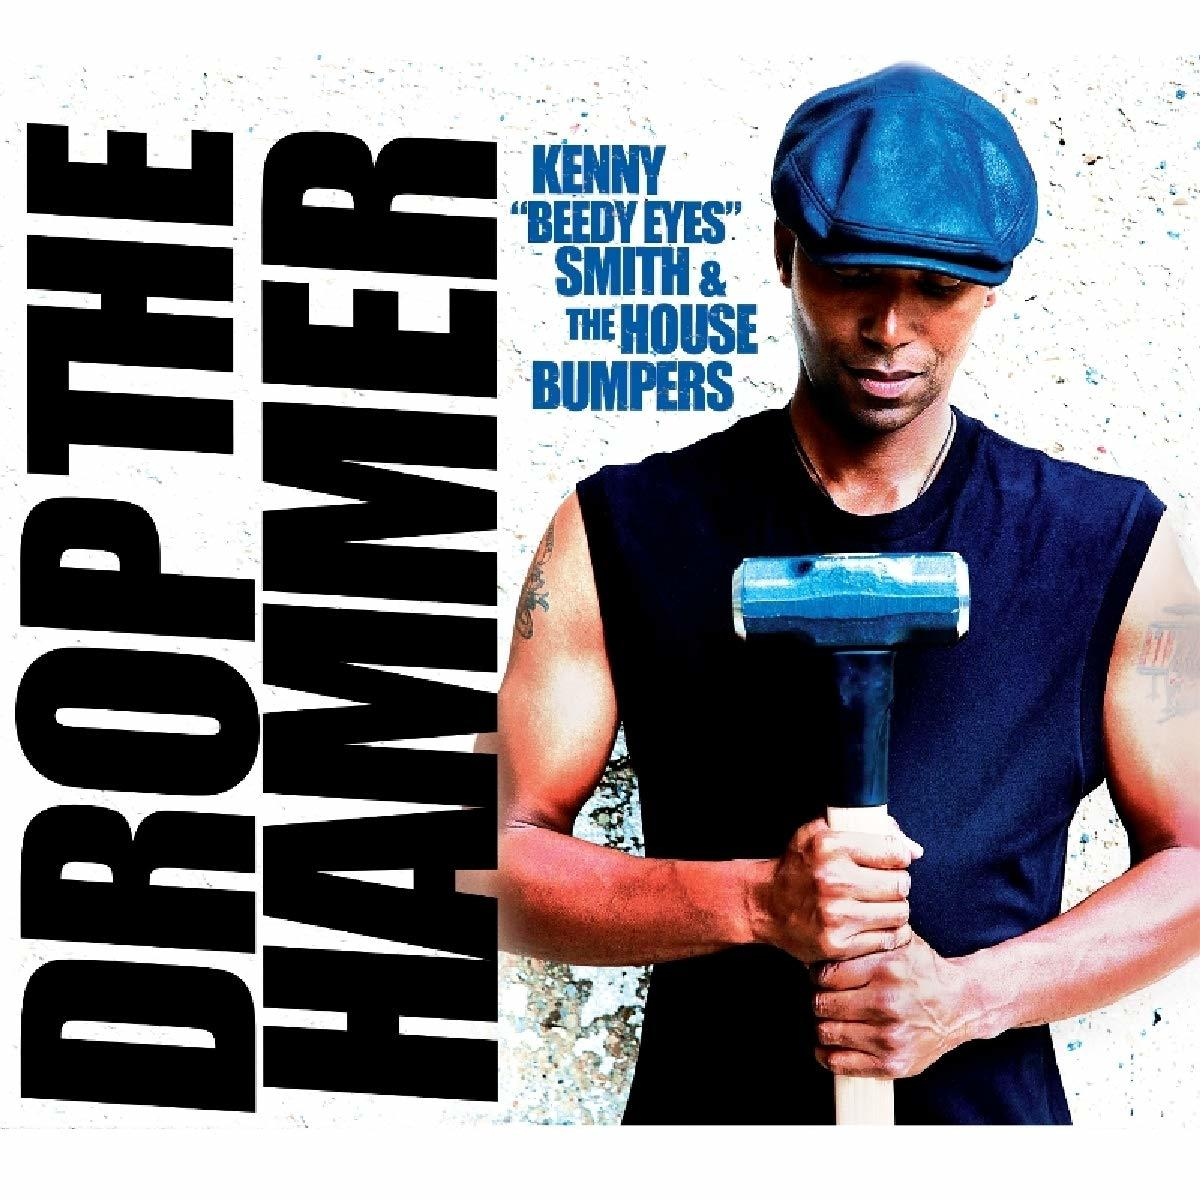 The House Bumpers, Kenny Smith Drop The Eyes- -beedy (CD) Hammer - 